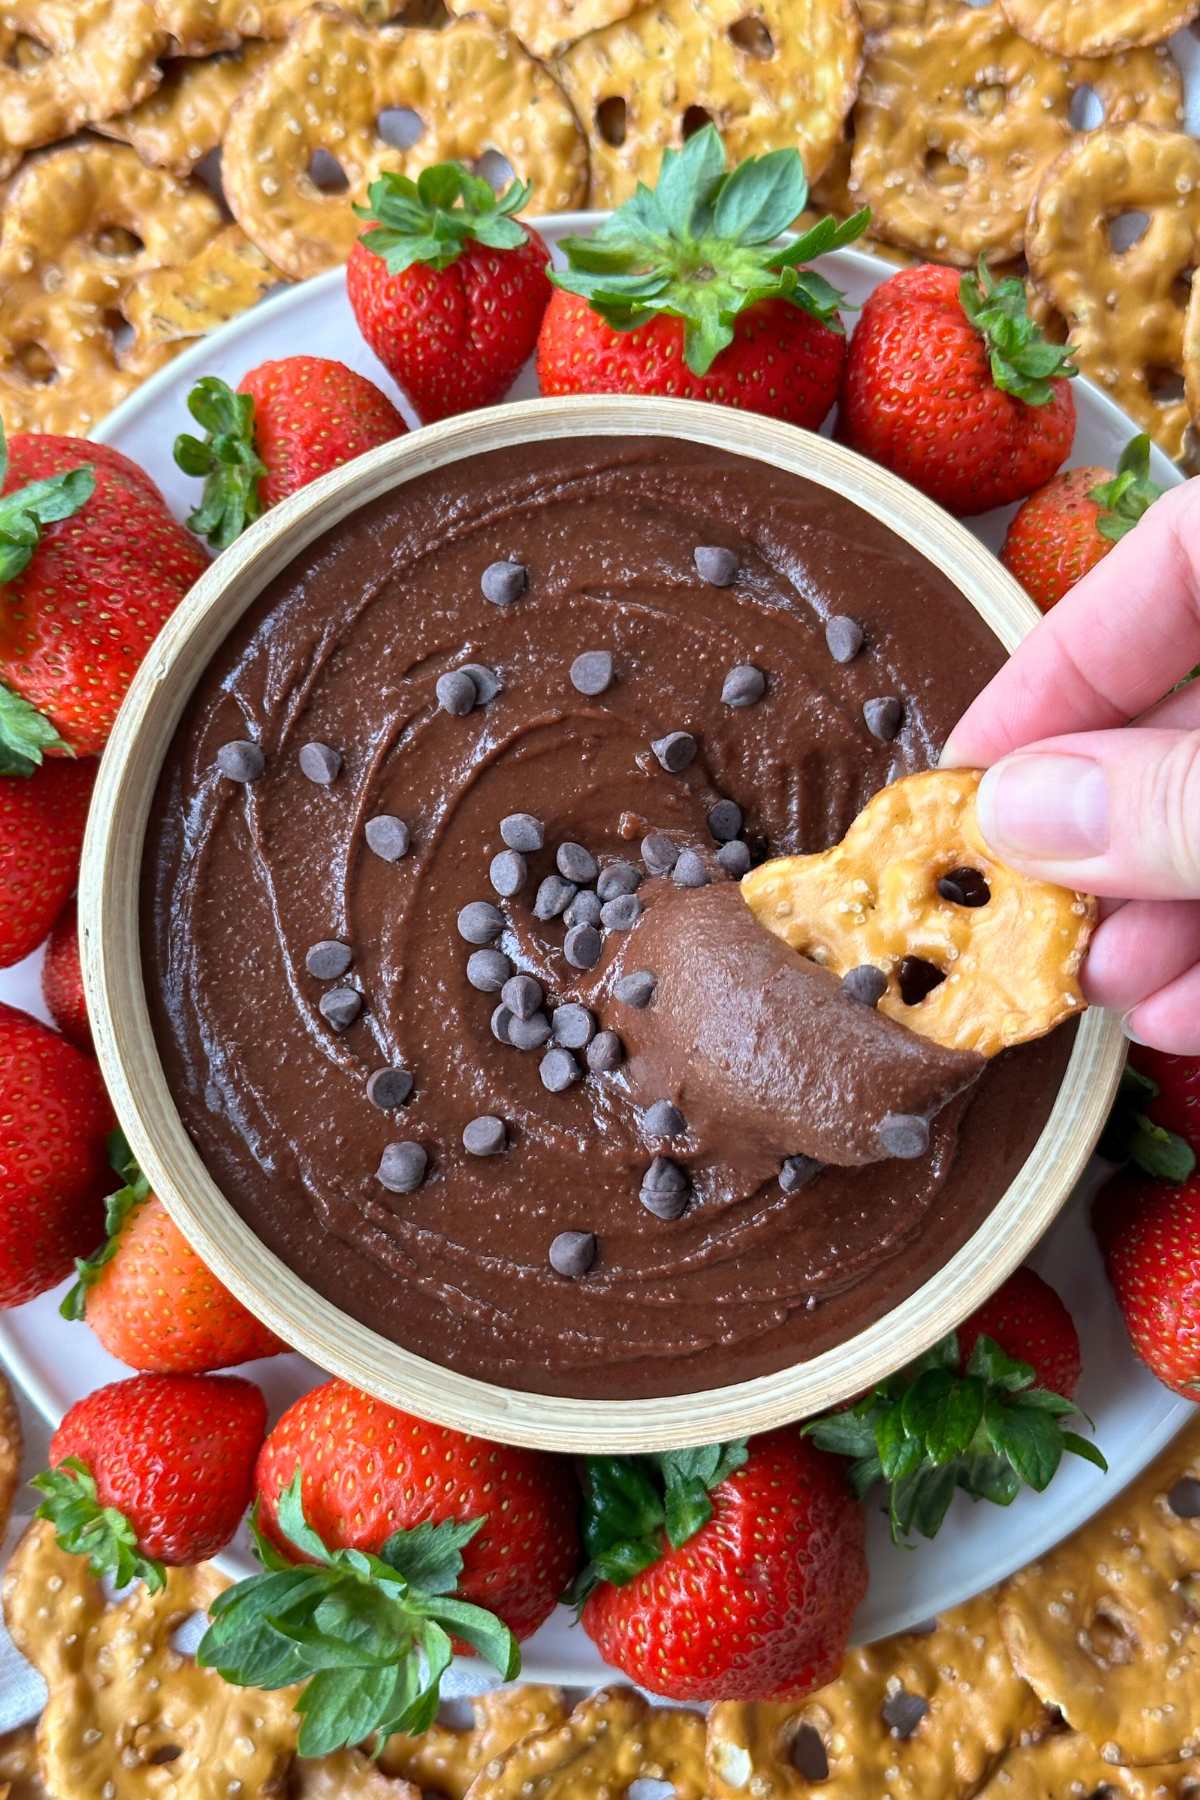 Pretzel being dipped into brownie batter hummus with chocolate chips. Strawberries and pretzel chips surround the bowl of hummus.